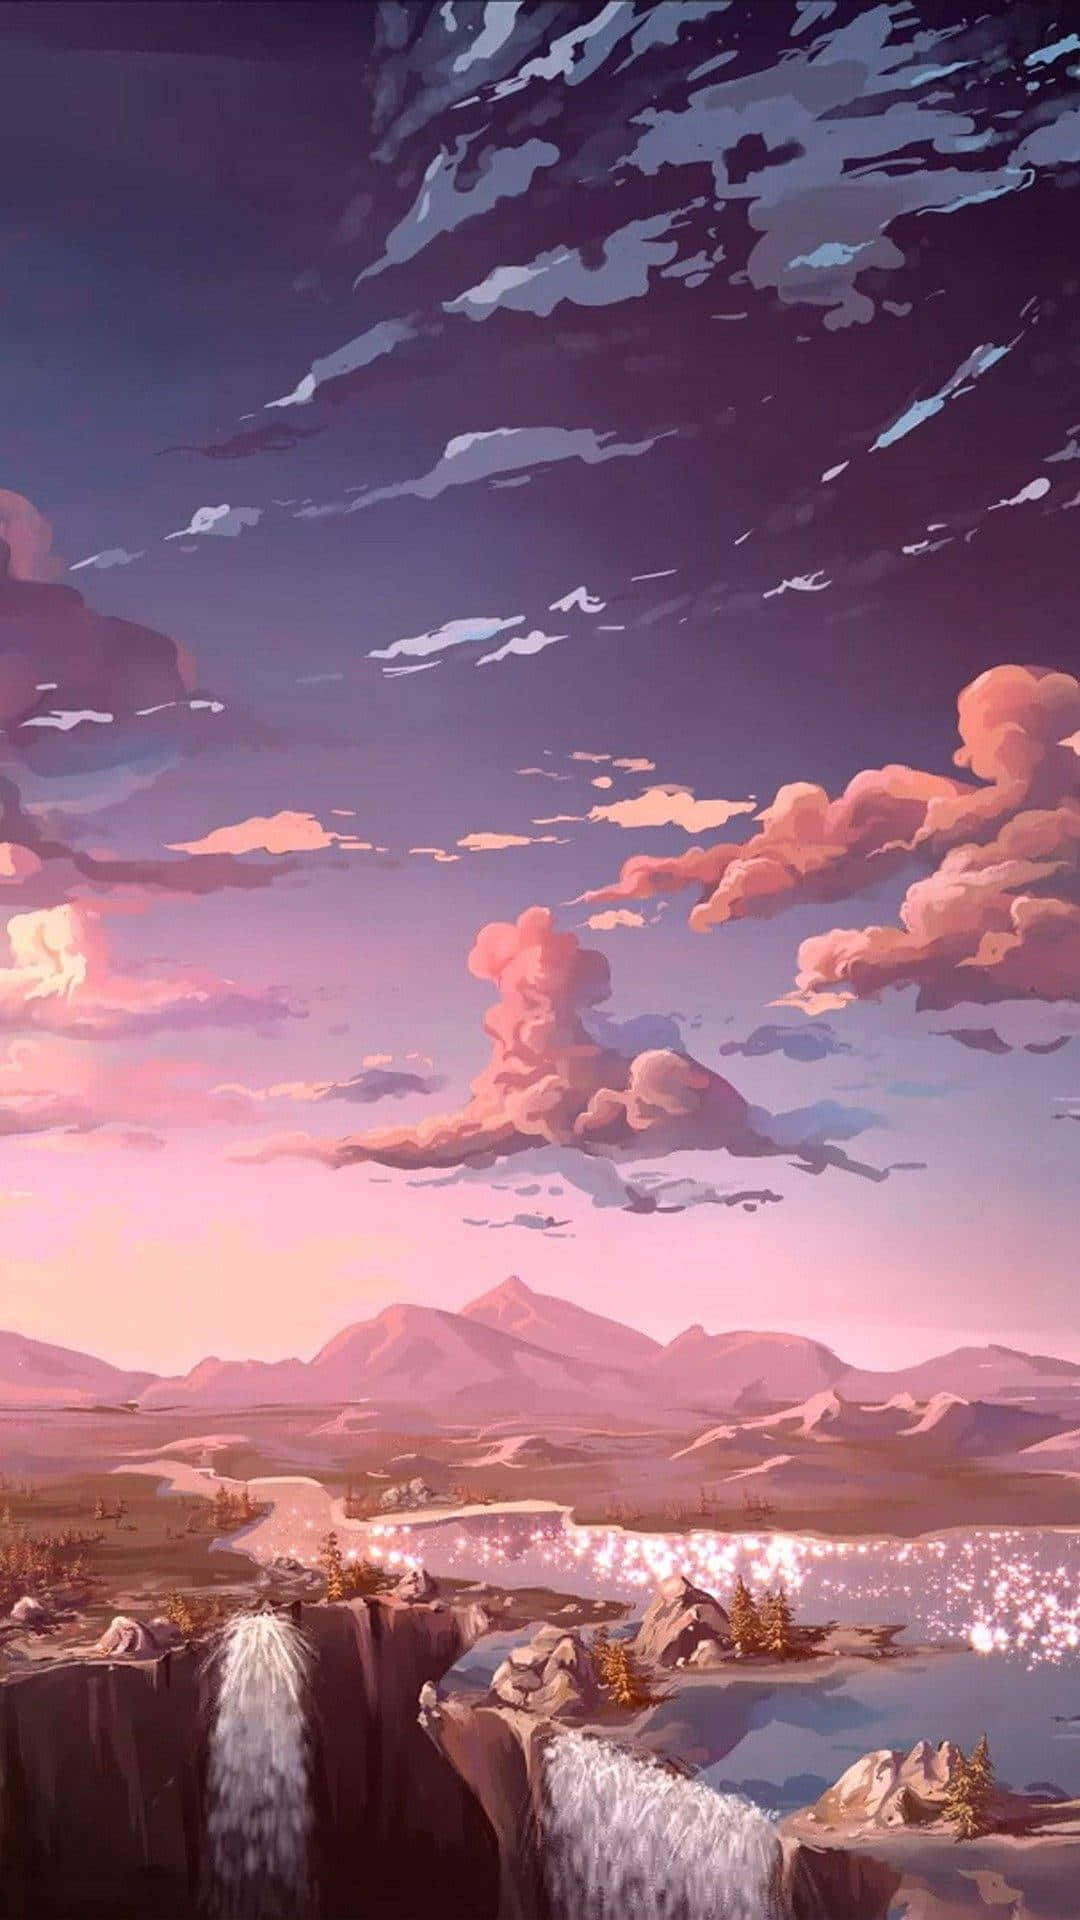 A warm, pastel-colored world of anime. Wallpaper